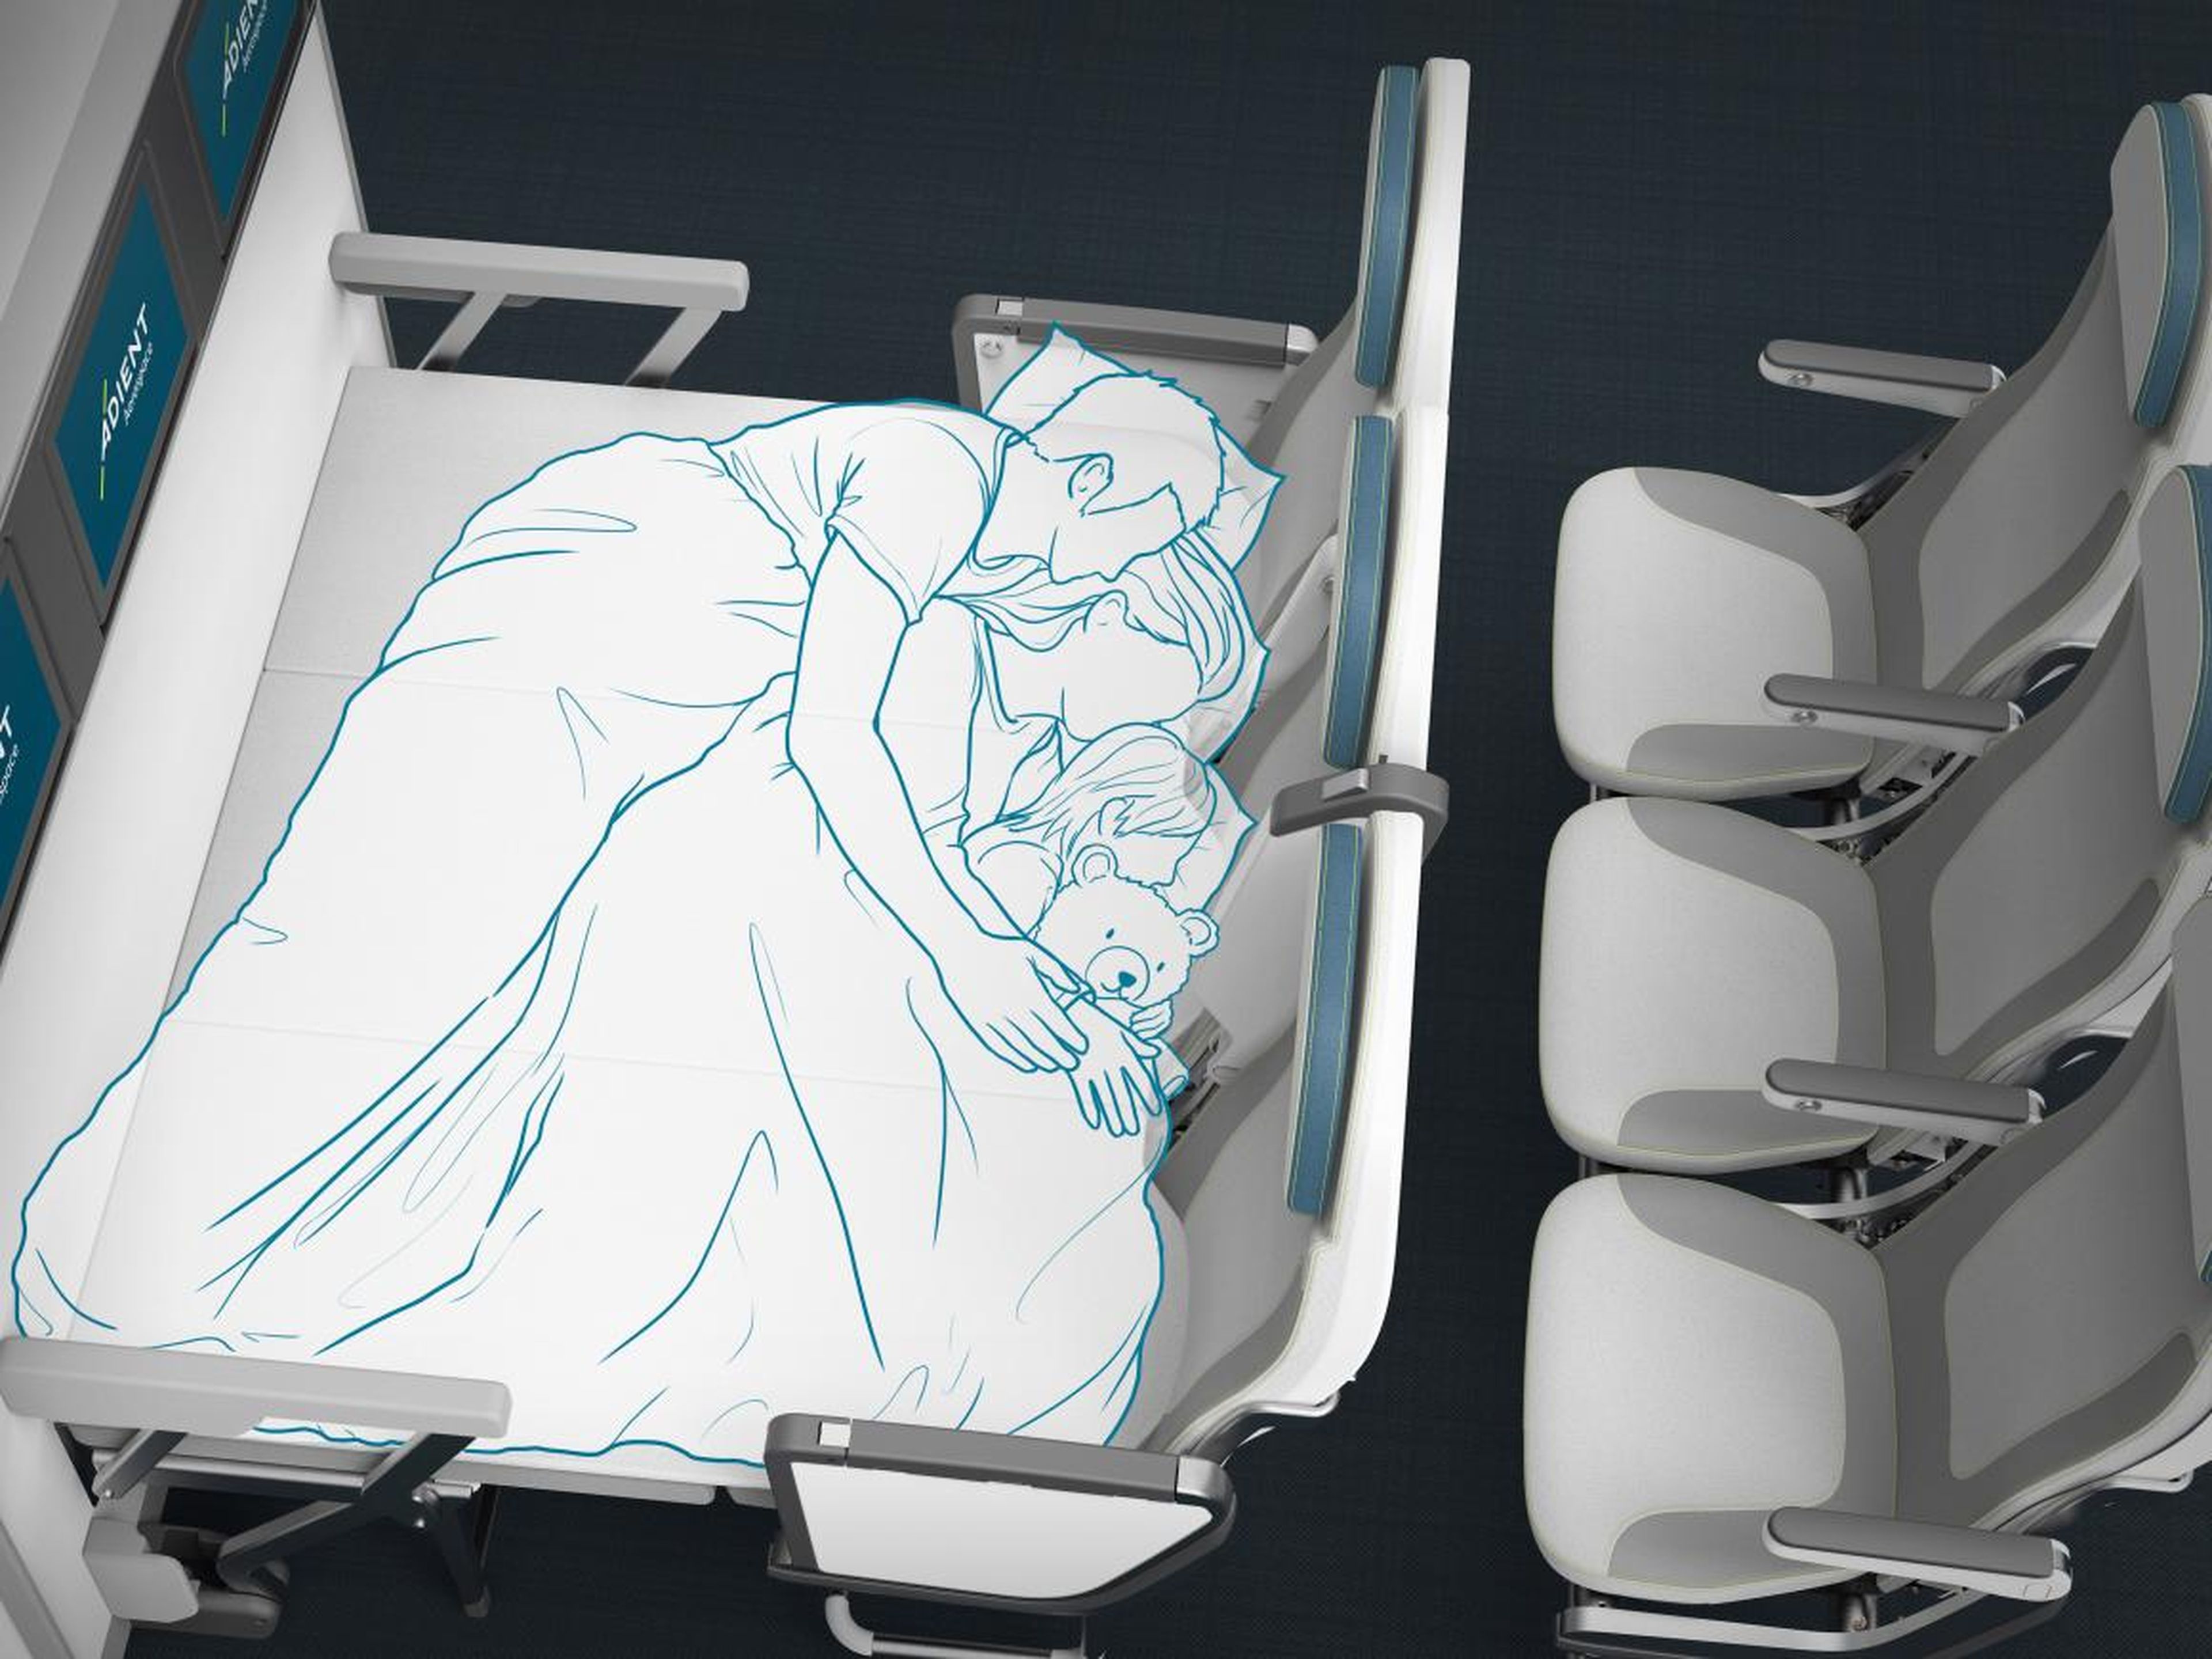 Innovators are also looking at tackling comfort in the economy cabin.